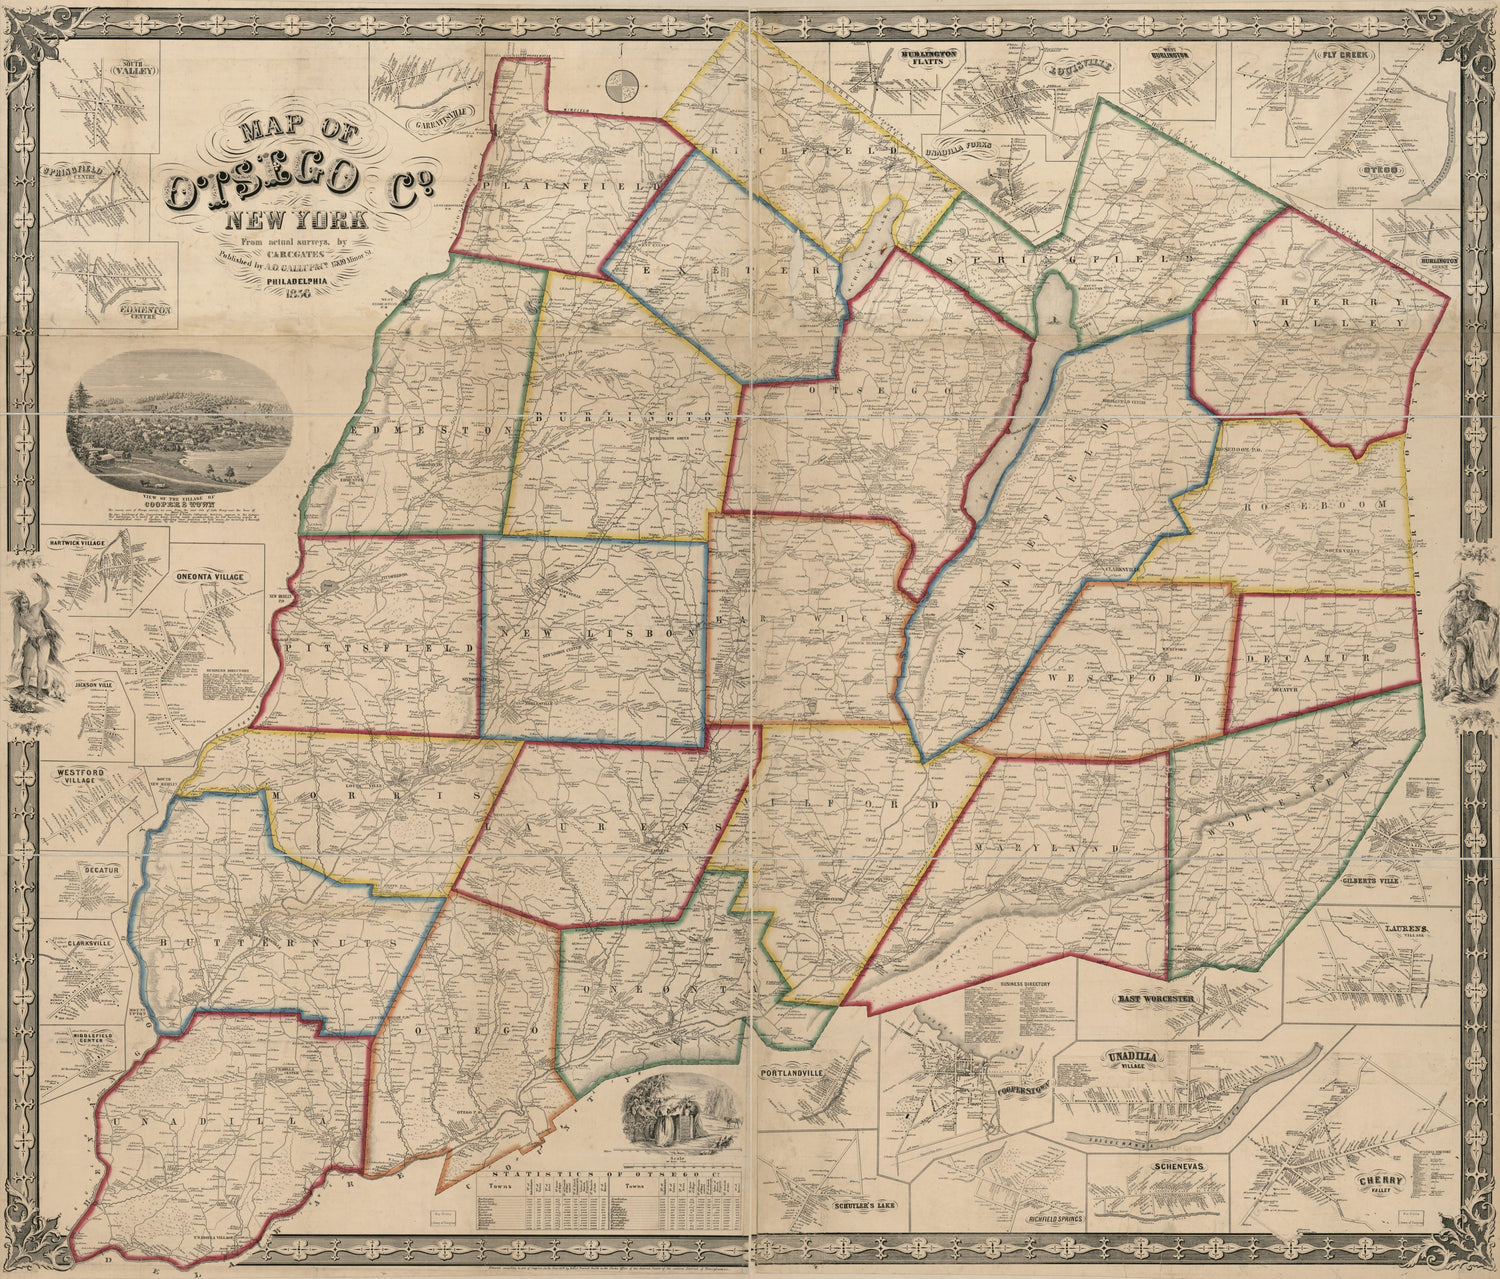 This old map of Map of Otsego Co. New York : from Actual Surveys from 1856 was created by  A.O. Gallup &amp; Co, B. C. Gates, C. Gates, Robert Pearsall Smith in 1856